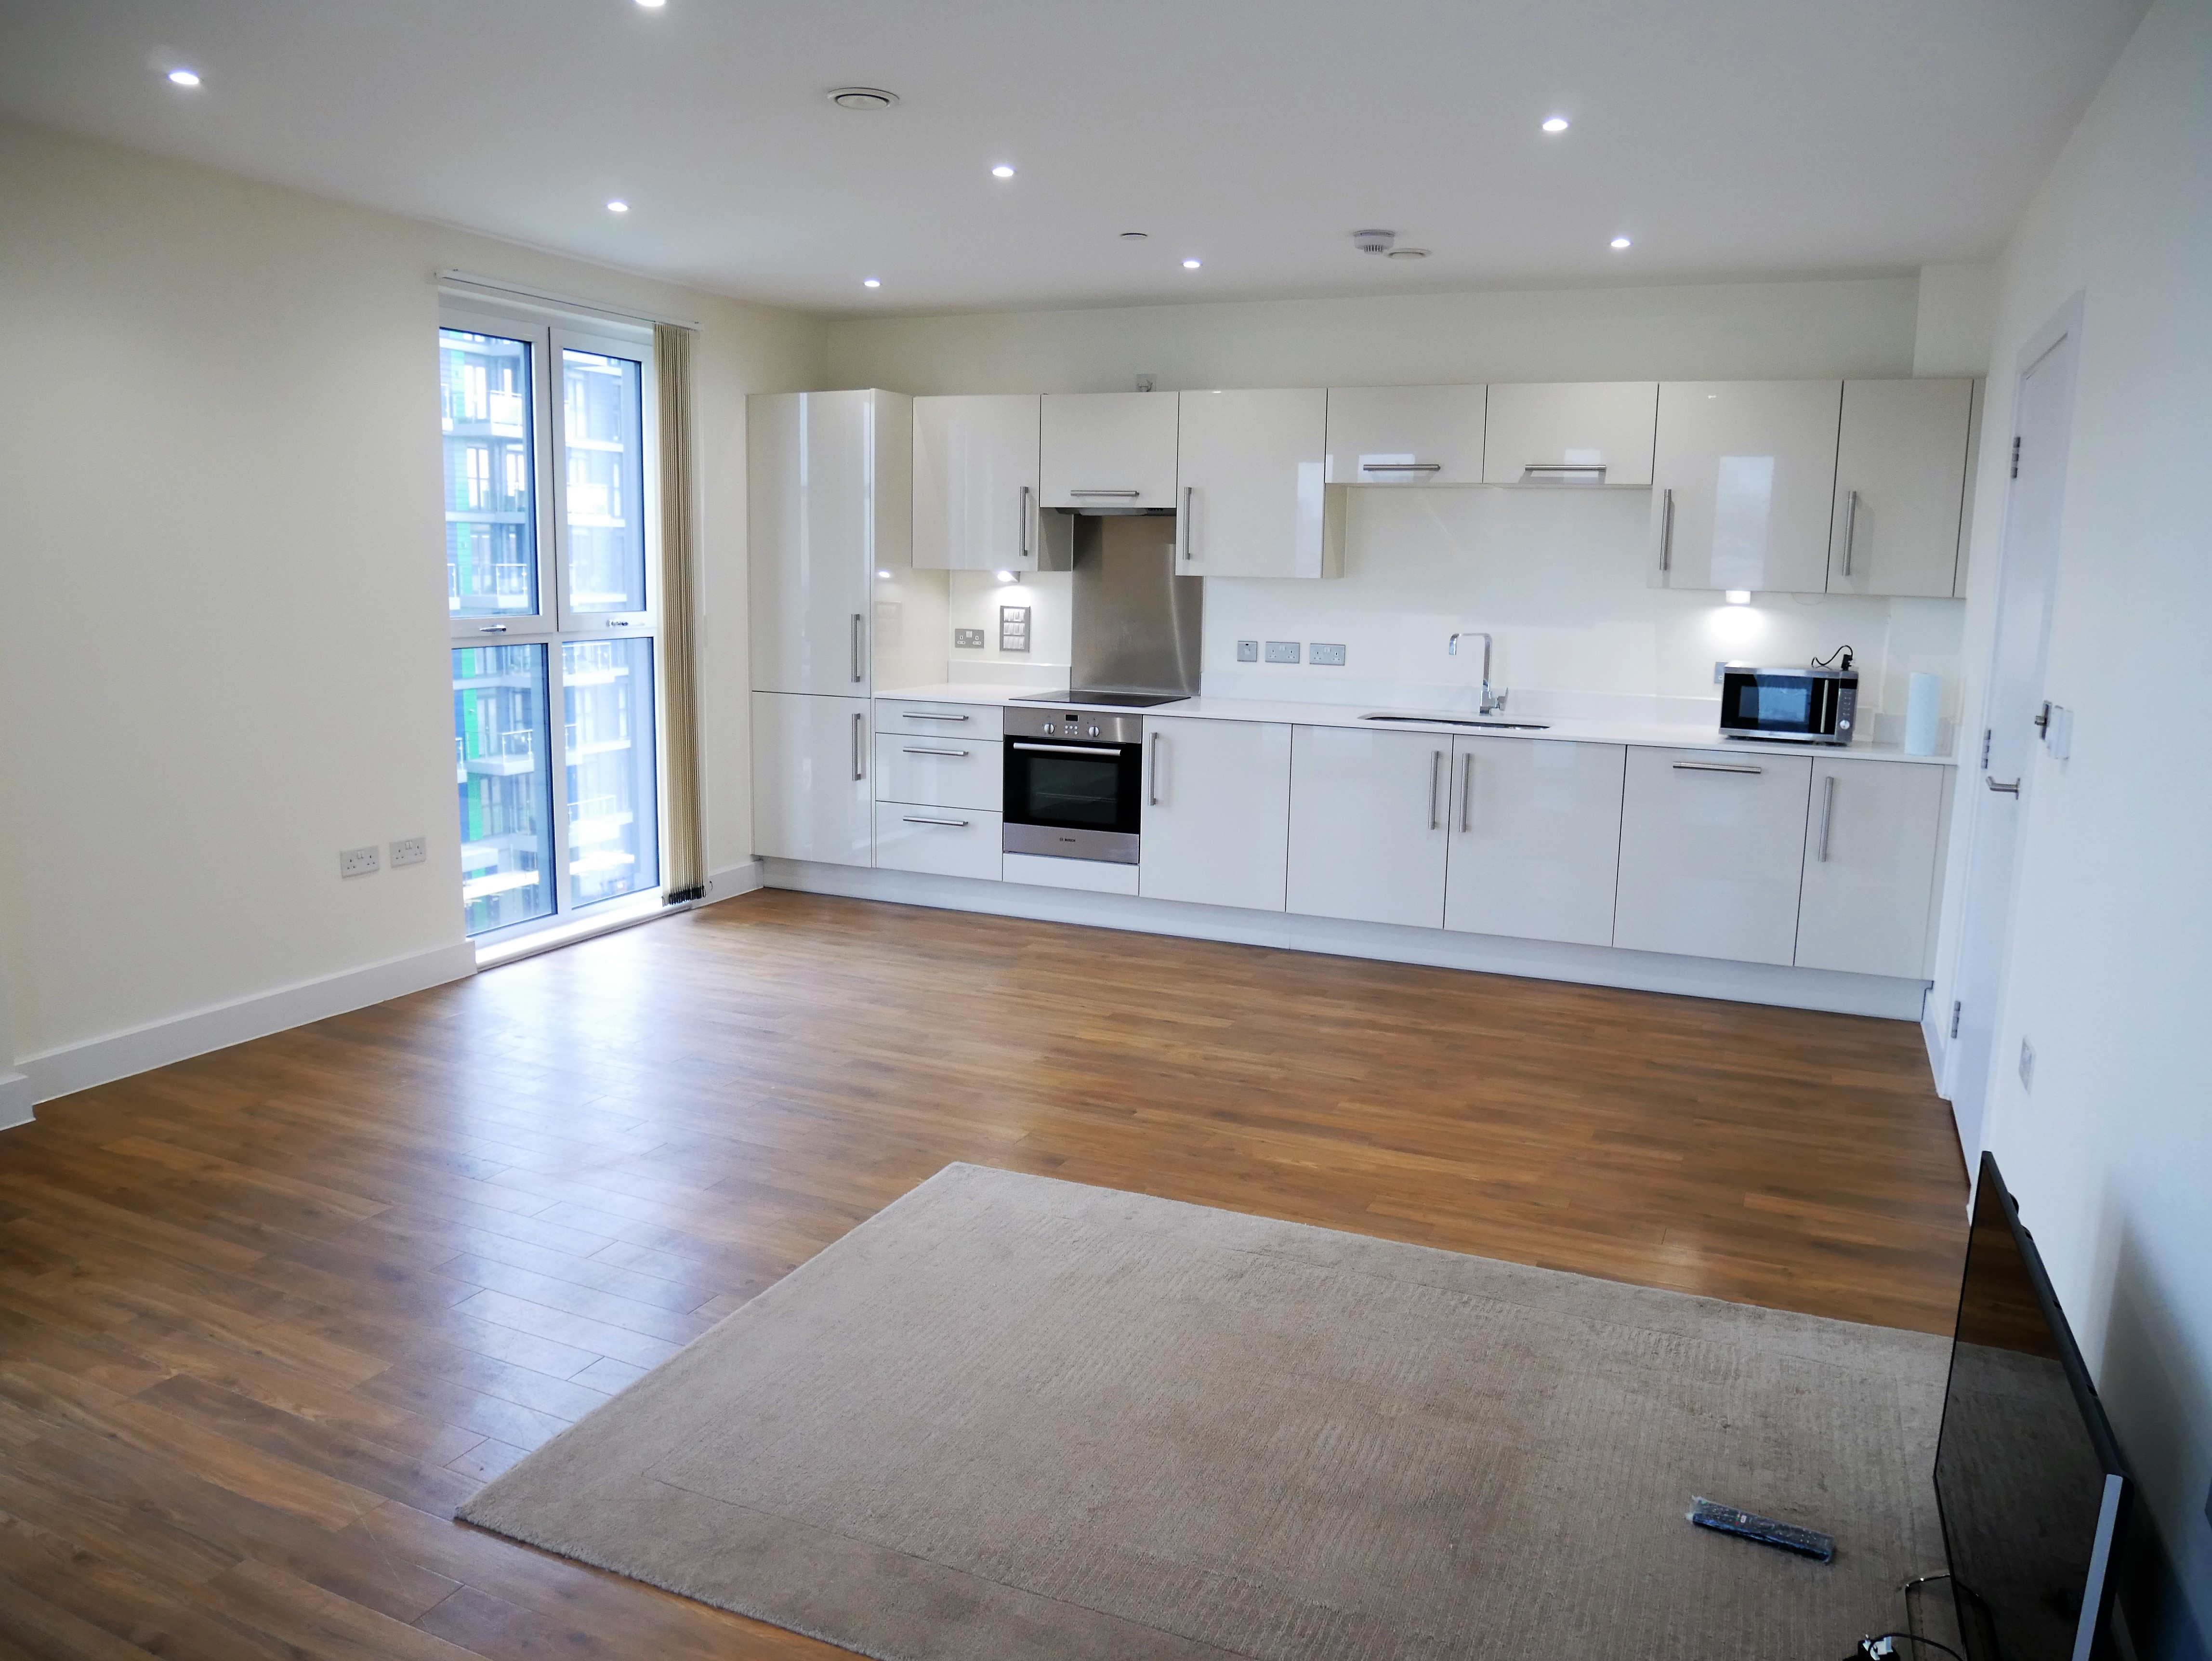 Stylish Two Bedroom & Bathroom Apartment In ‘Venice House’ On Hatton Road